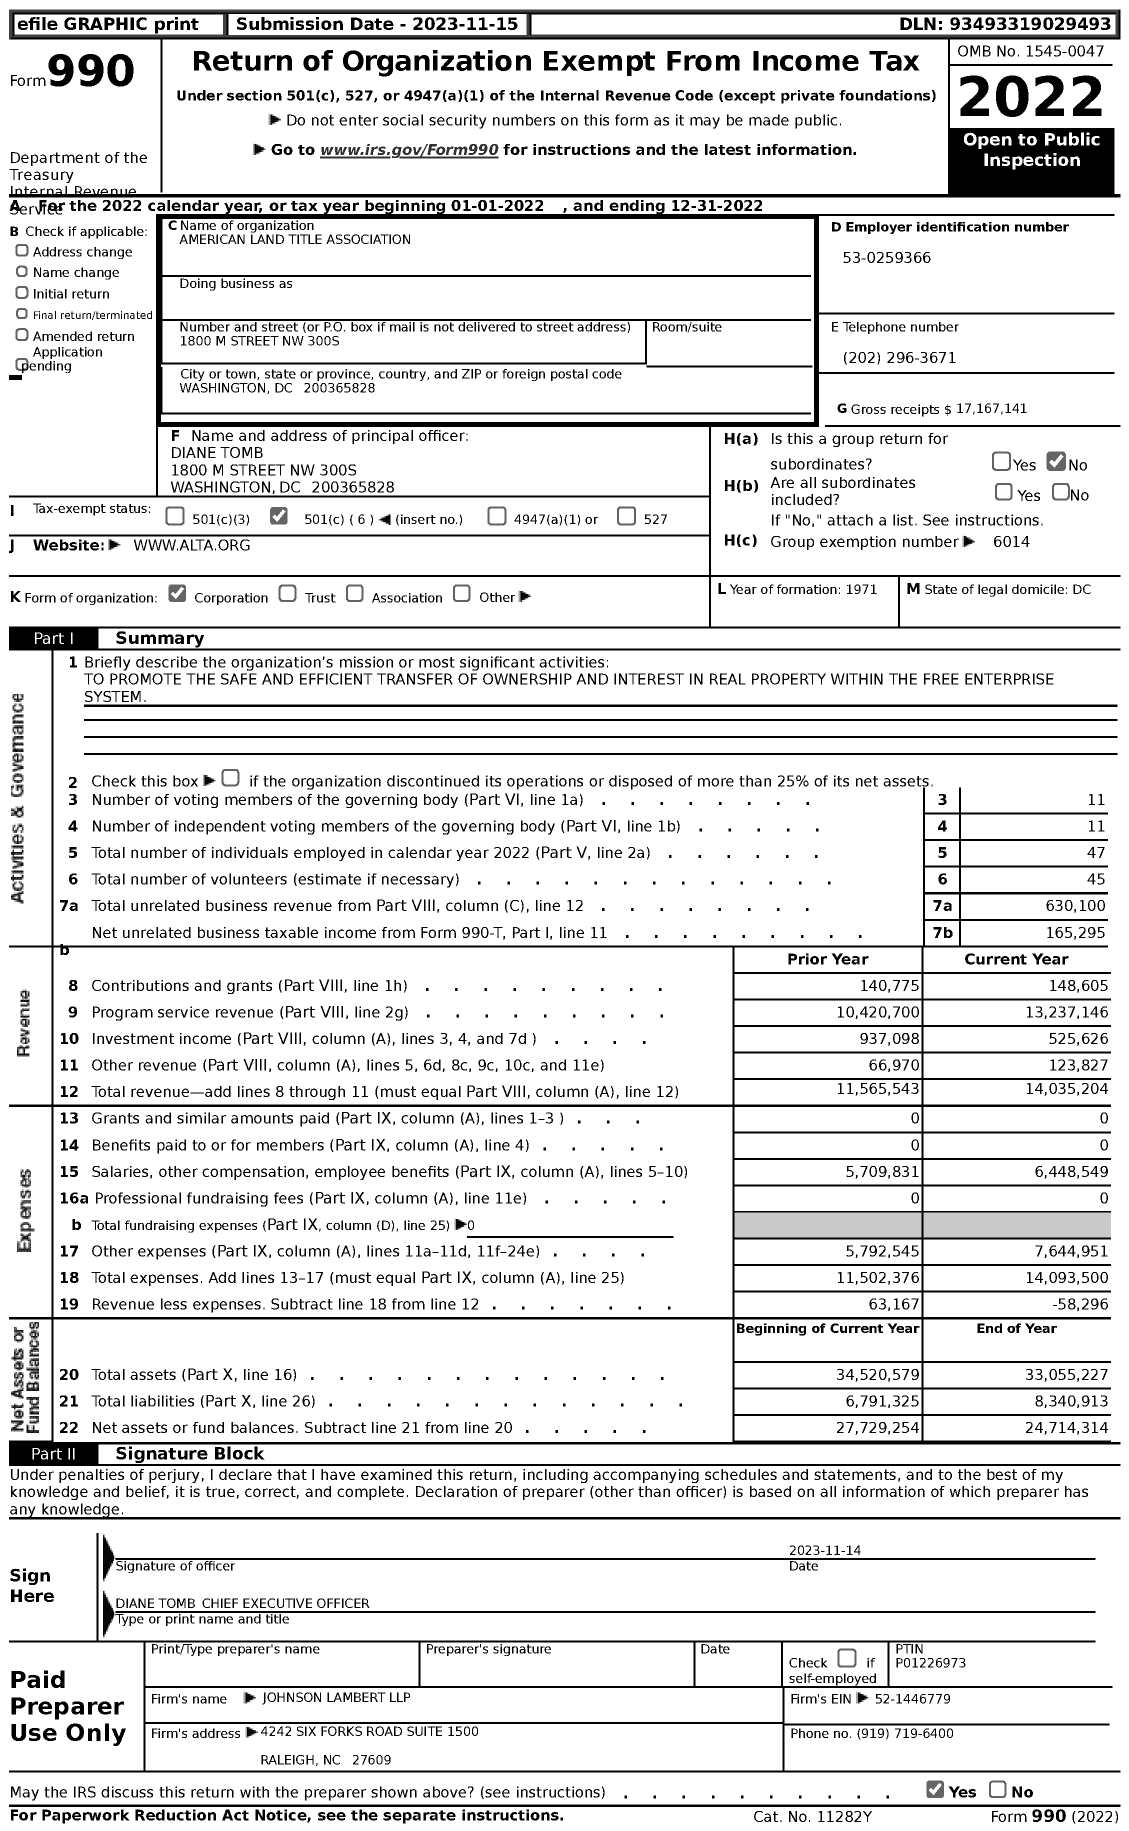 Image of first page of 2022 Form 990 for American Land Title Association (ALTA)